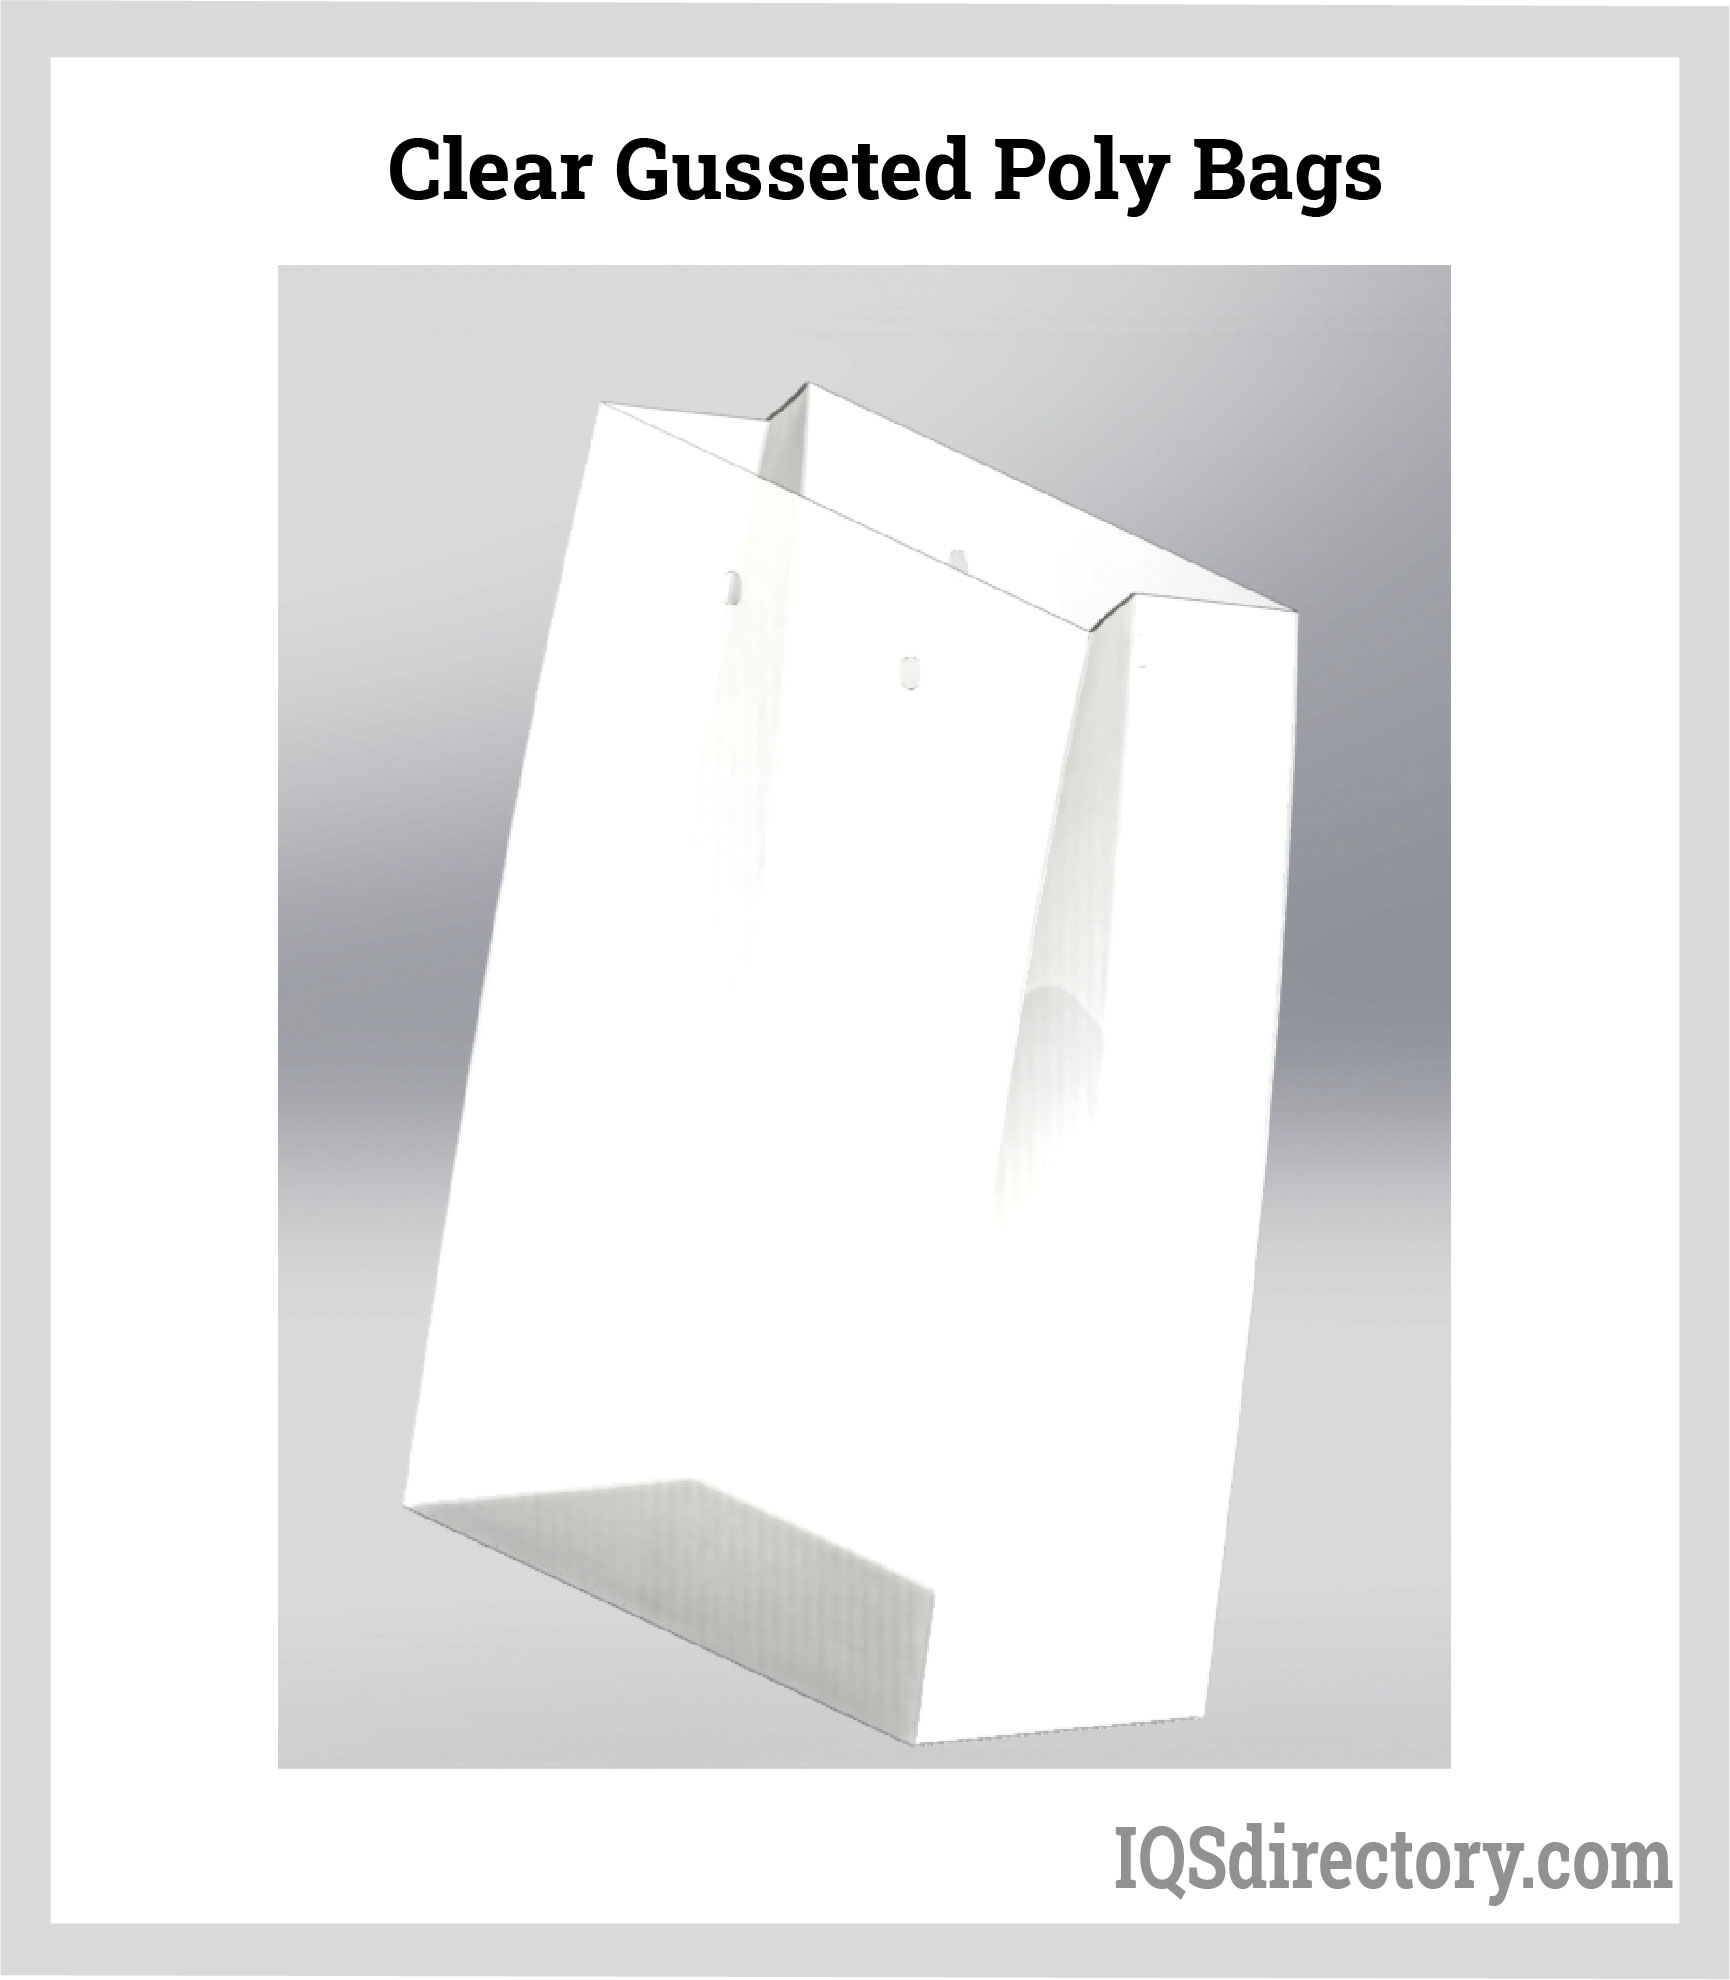 Clear Gusseted Poly Bags